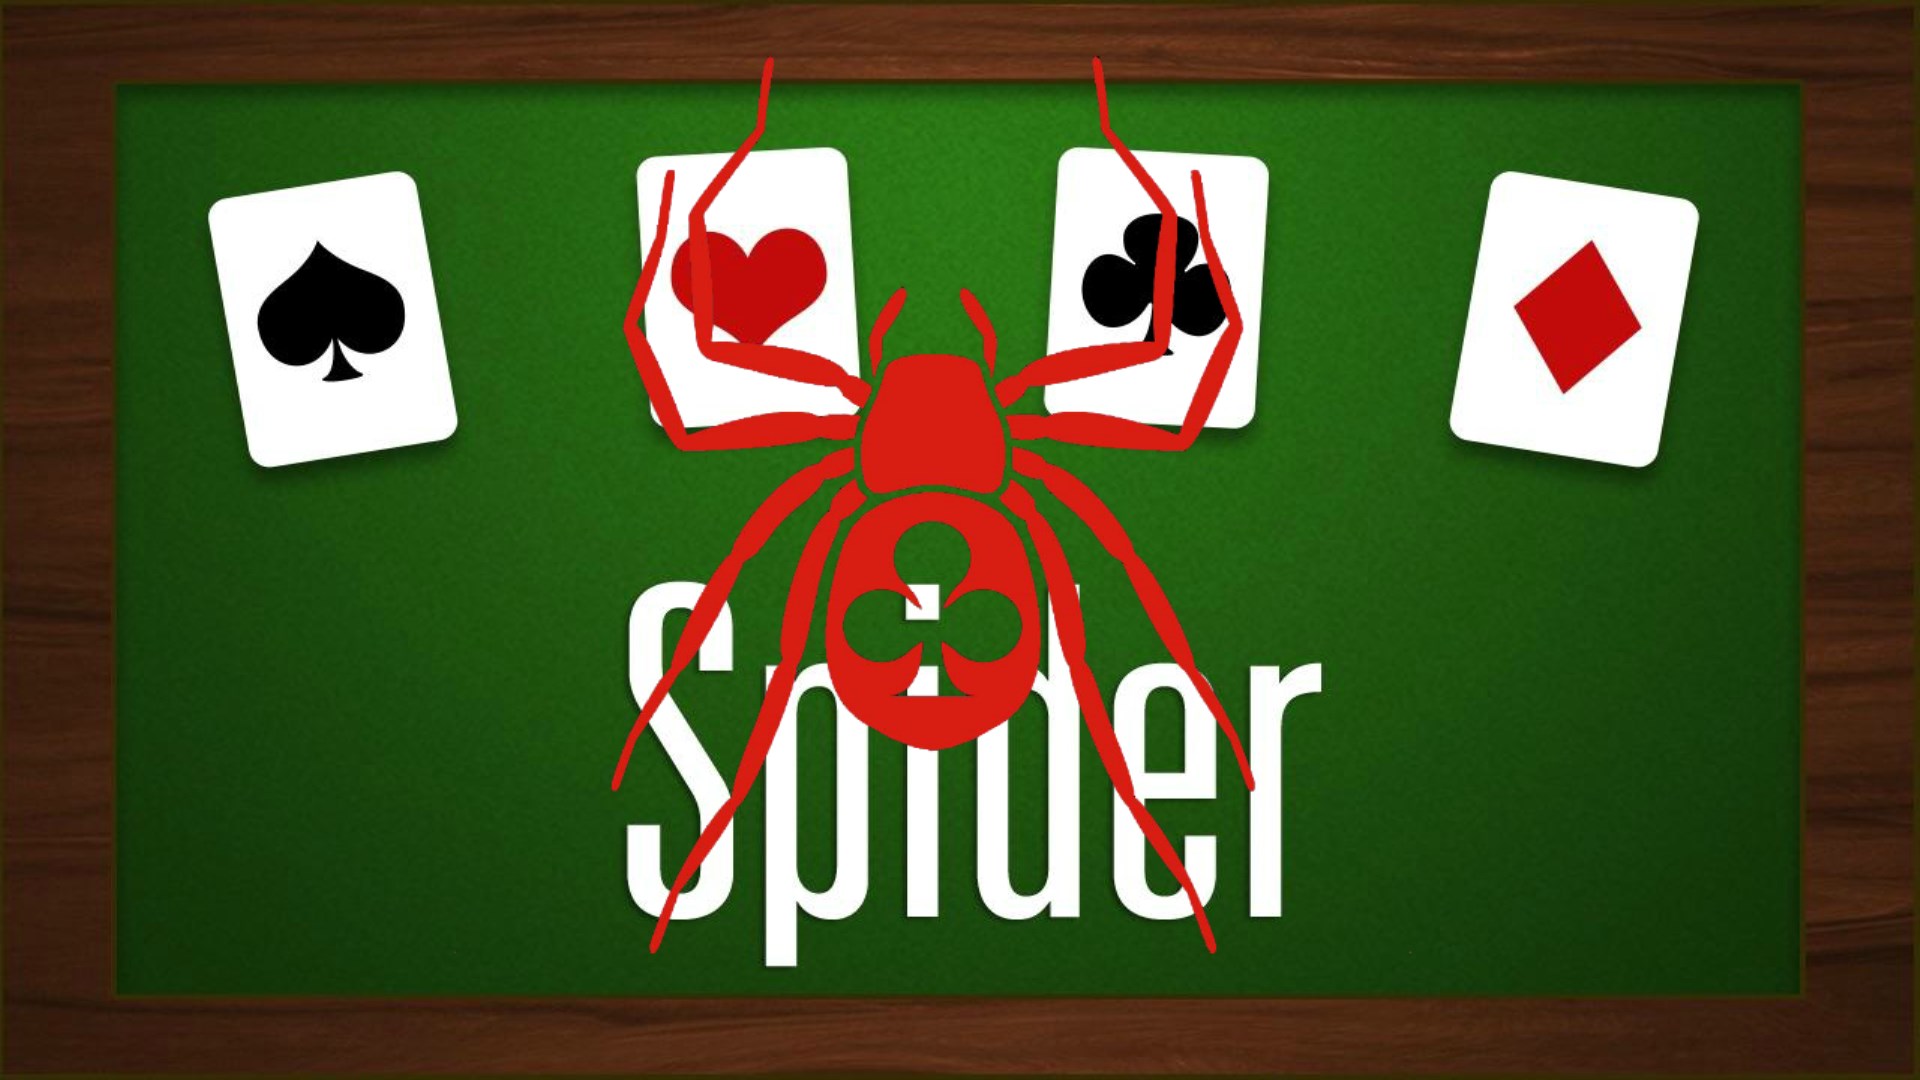 microsoft spider solitaire free download xp